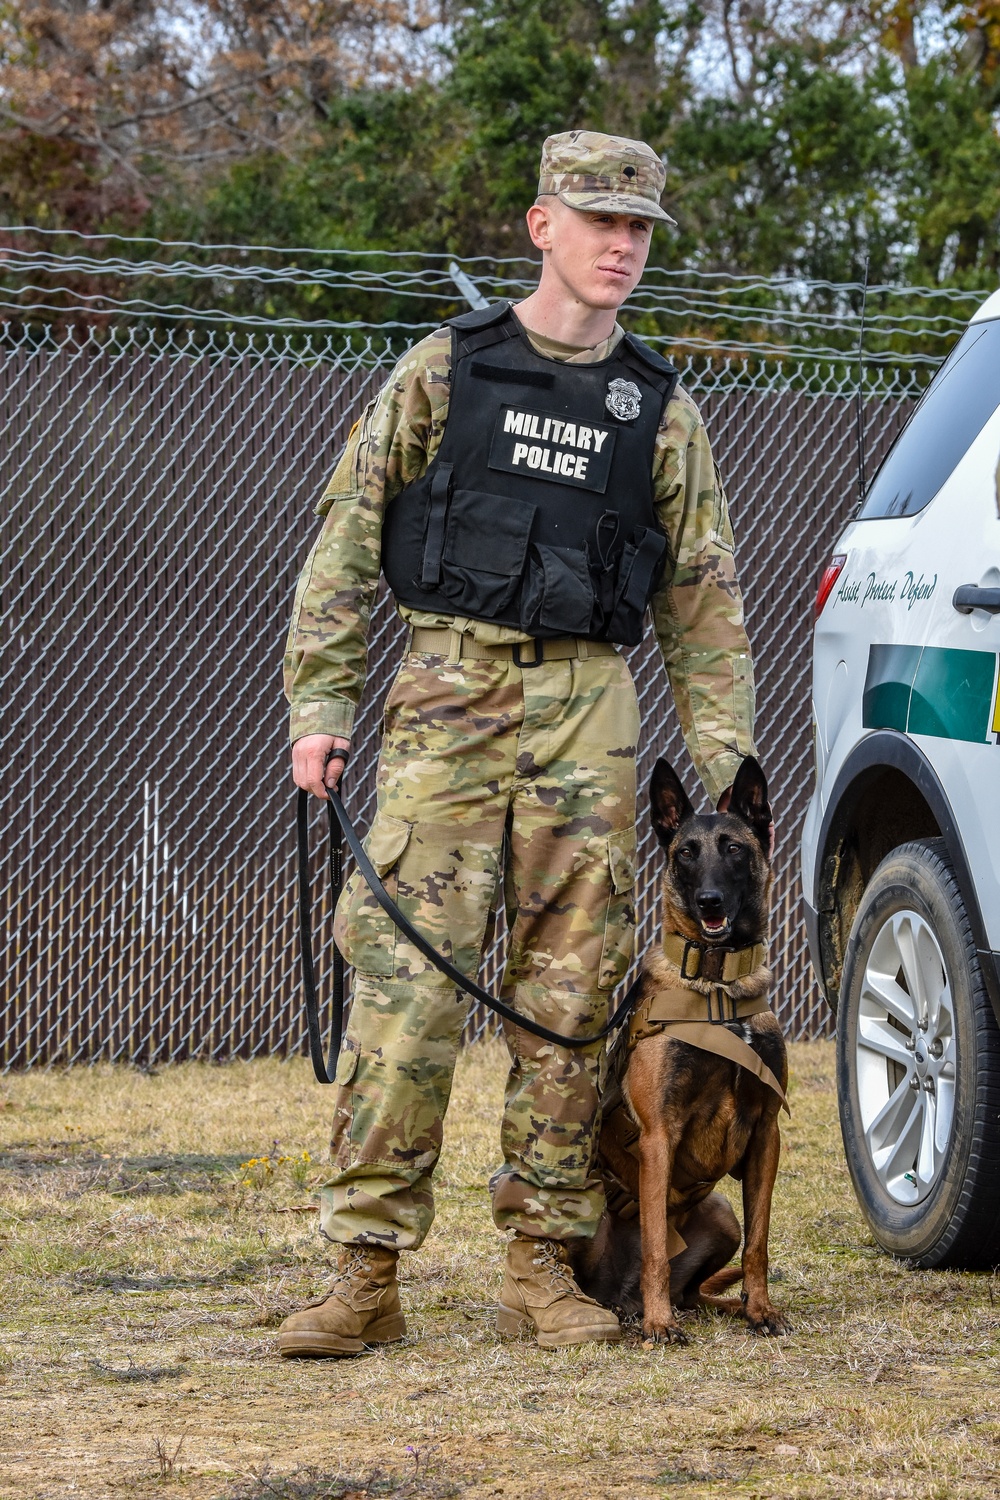 DVIDS Images U.S. Army K9 and Military Police [Image 45 of 76]